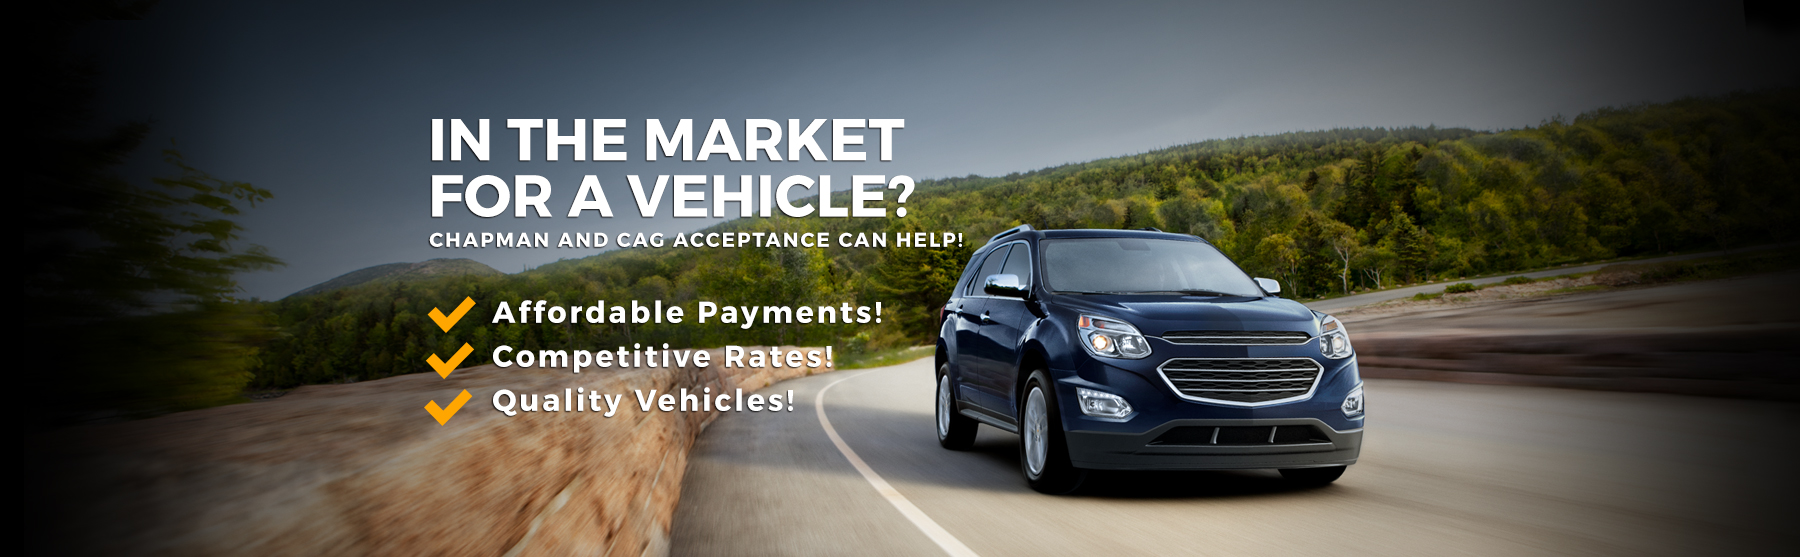 In The market for a new vehicle?